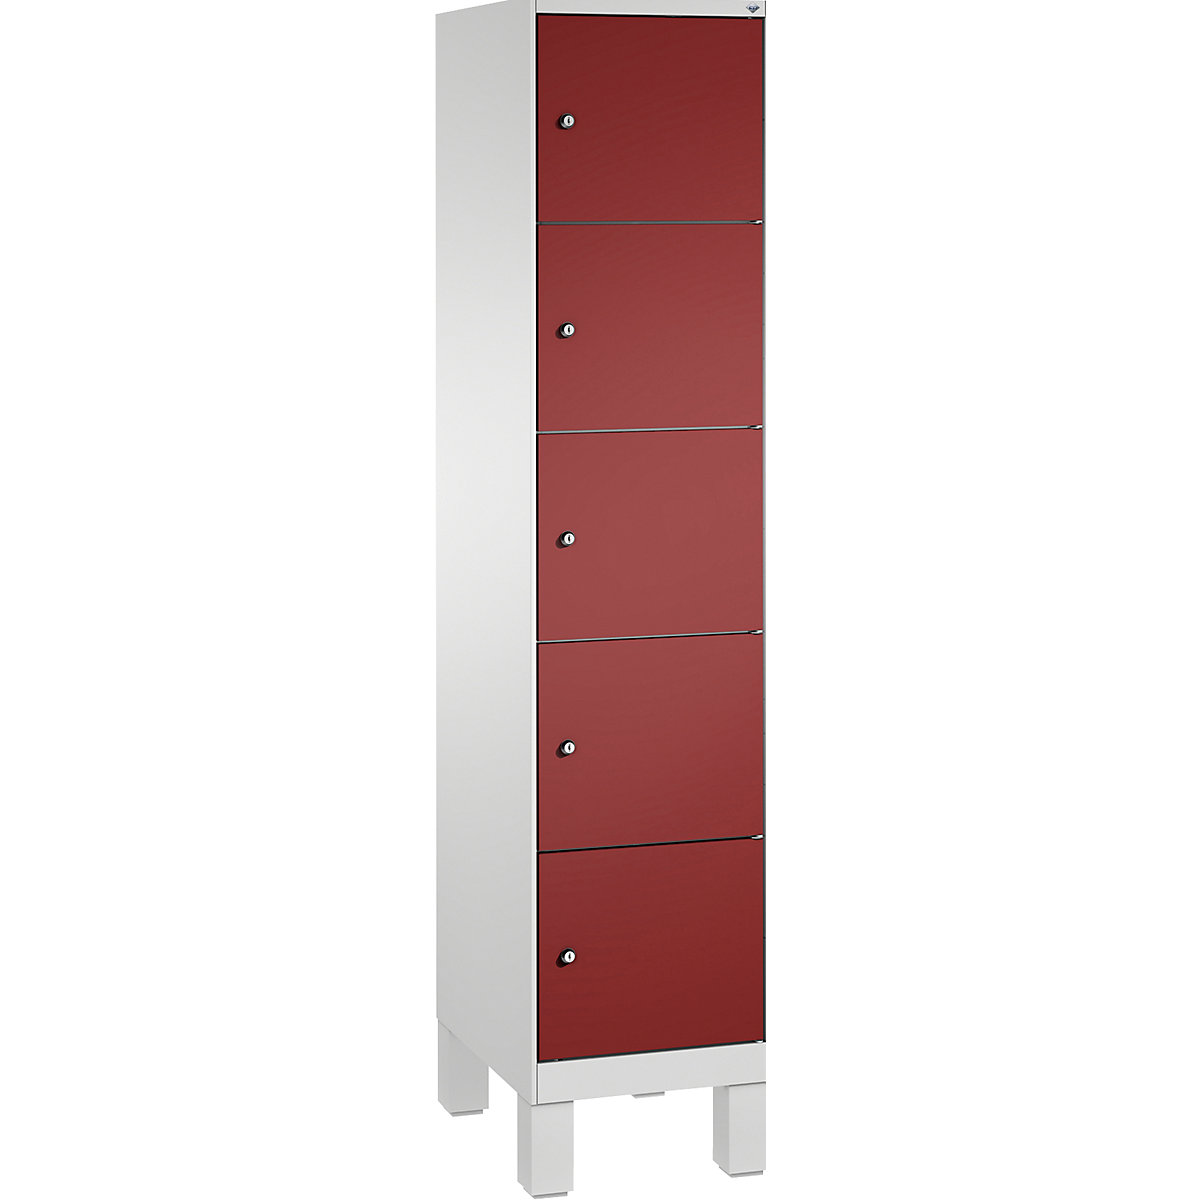 EVOLO locker unit, with feet – C+P, 1 compartment, 5 shelf compartments, compartment width 400 mm, light grey / ruby red-7